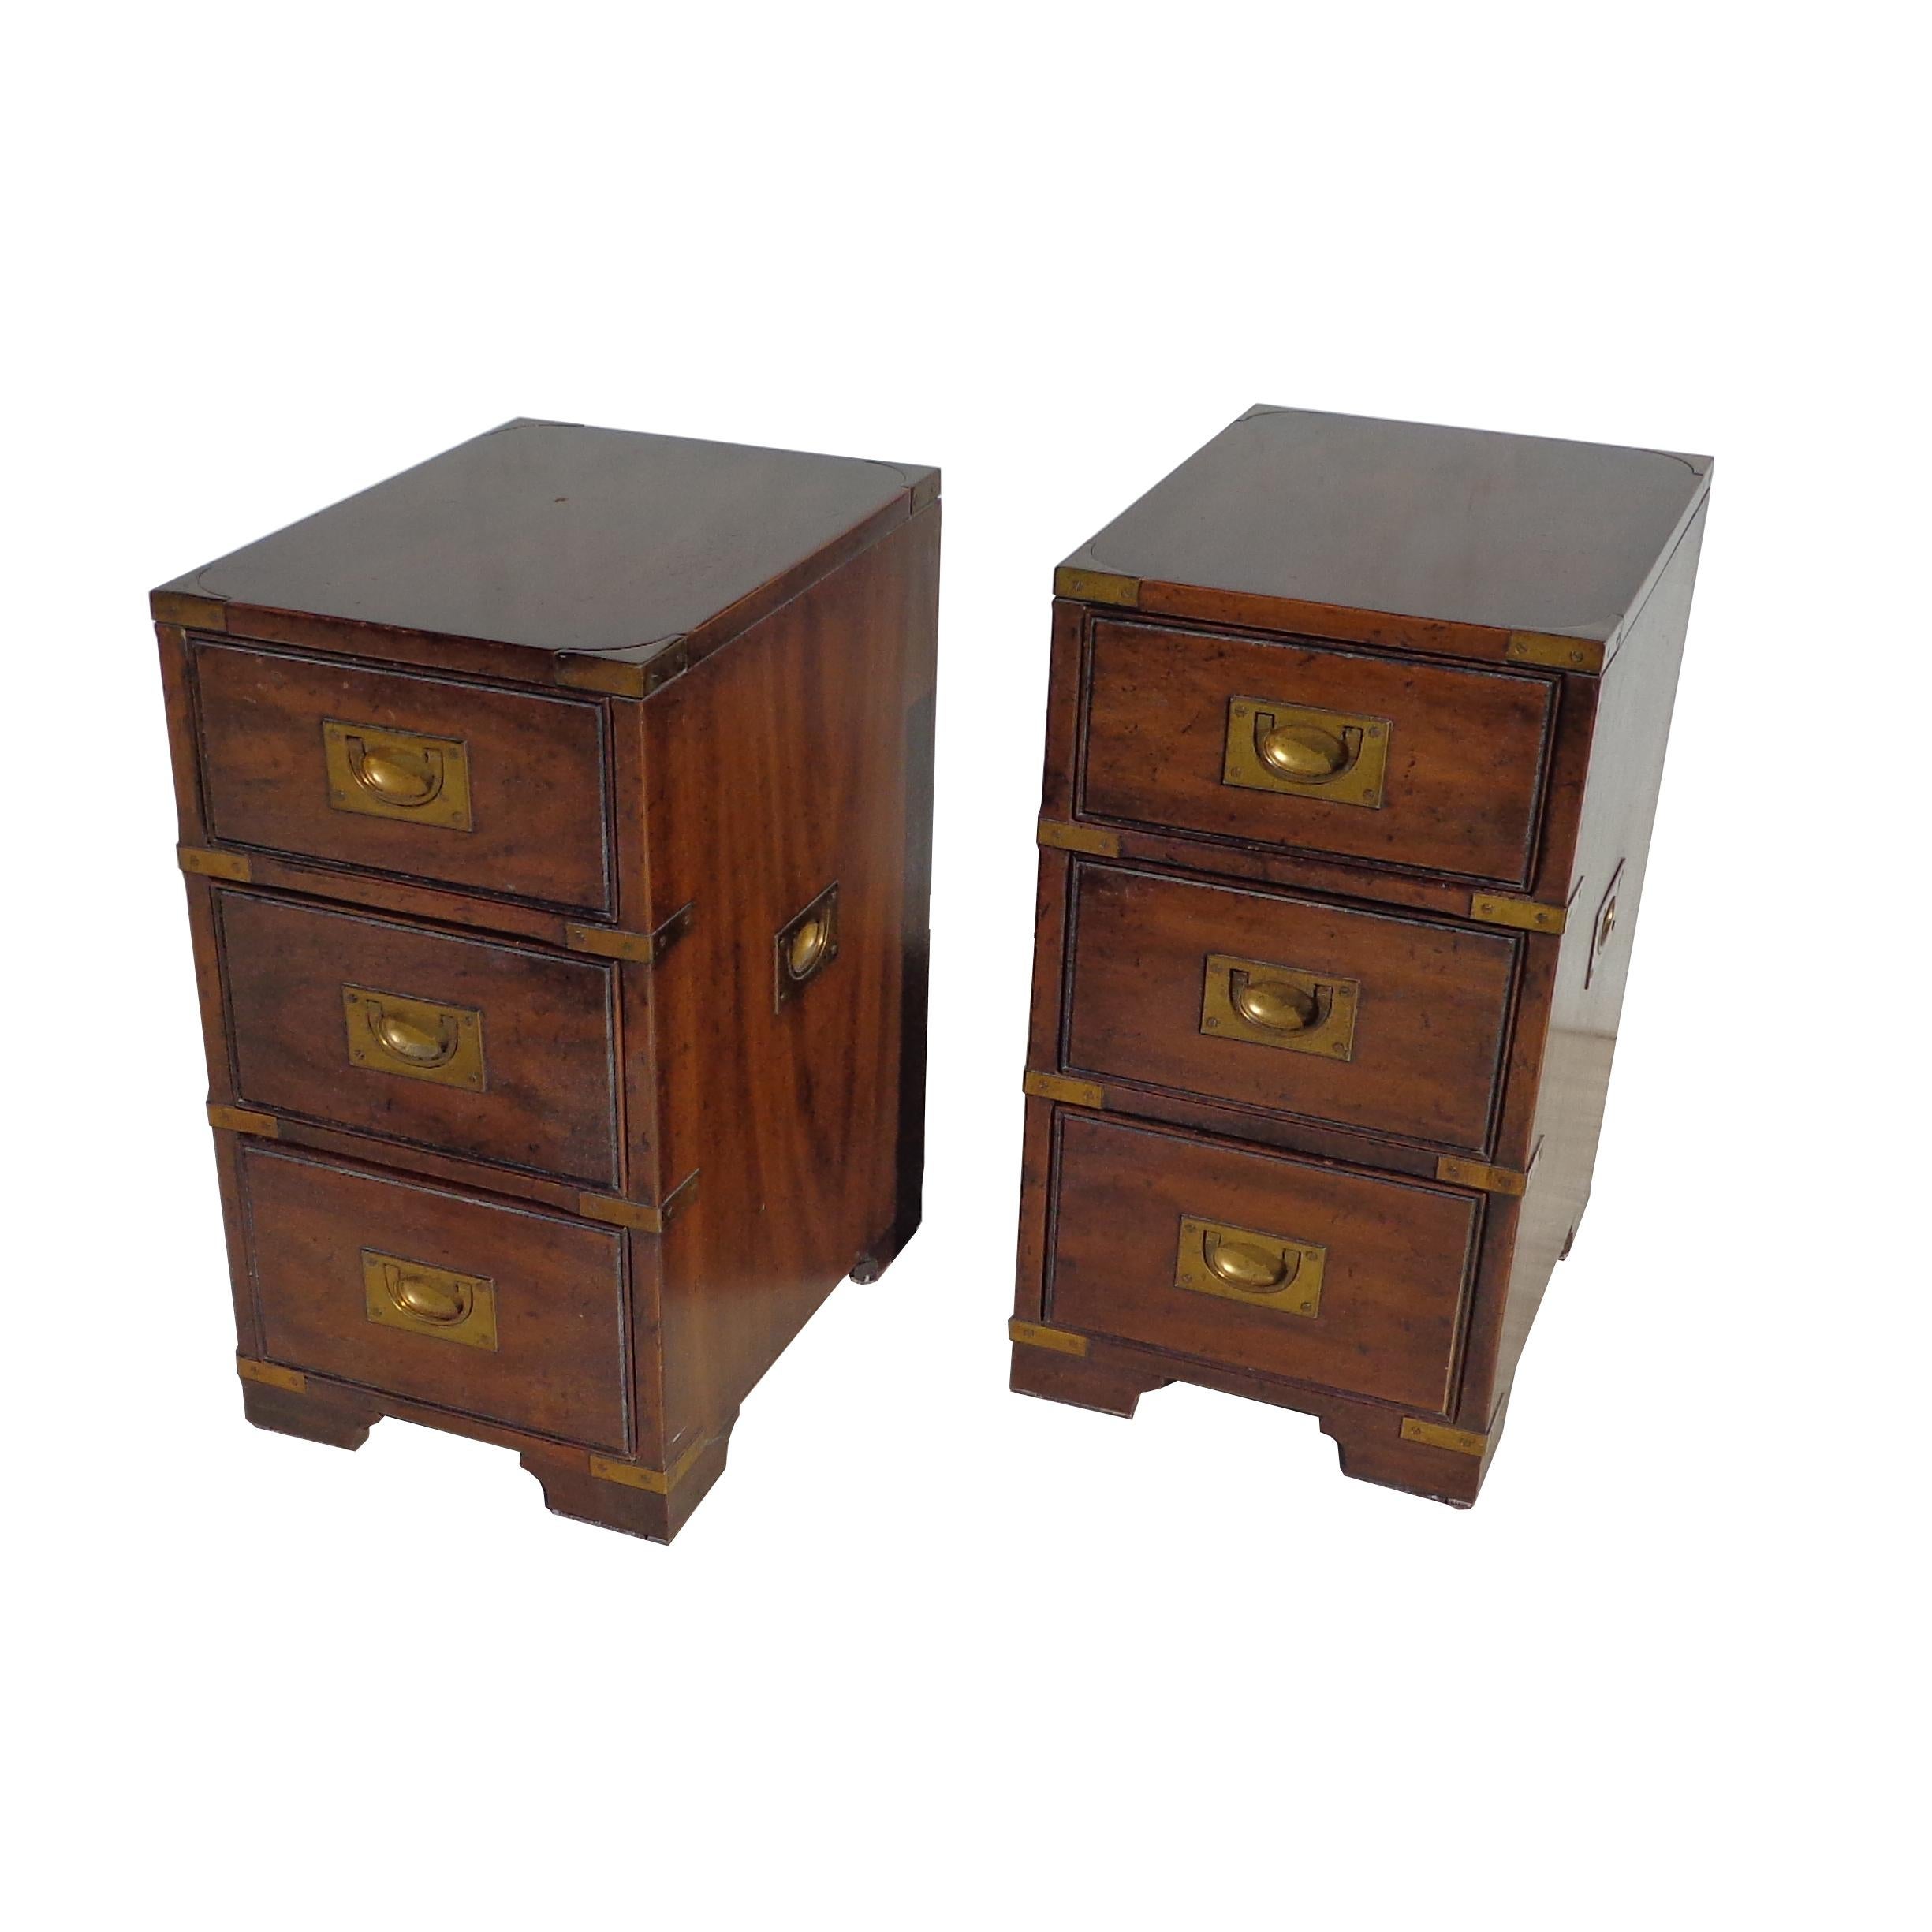 Late 20th Century Pair of Drexel Campaign Cabinet Nightstands